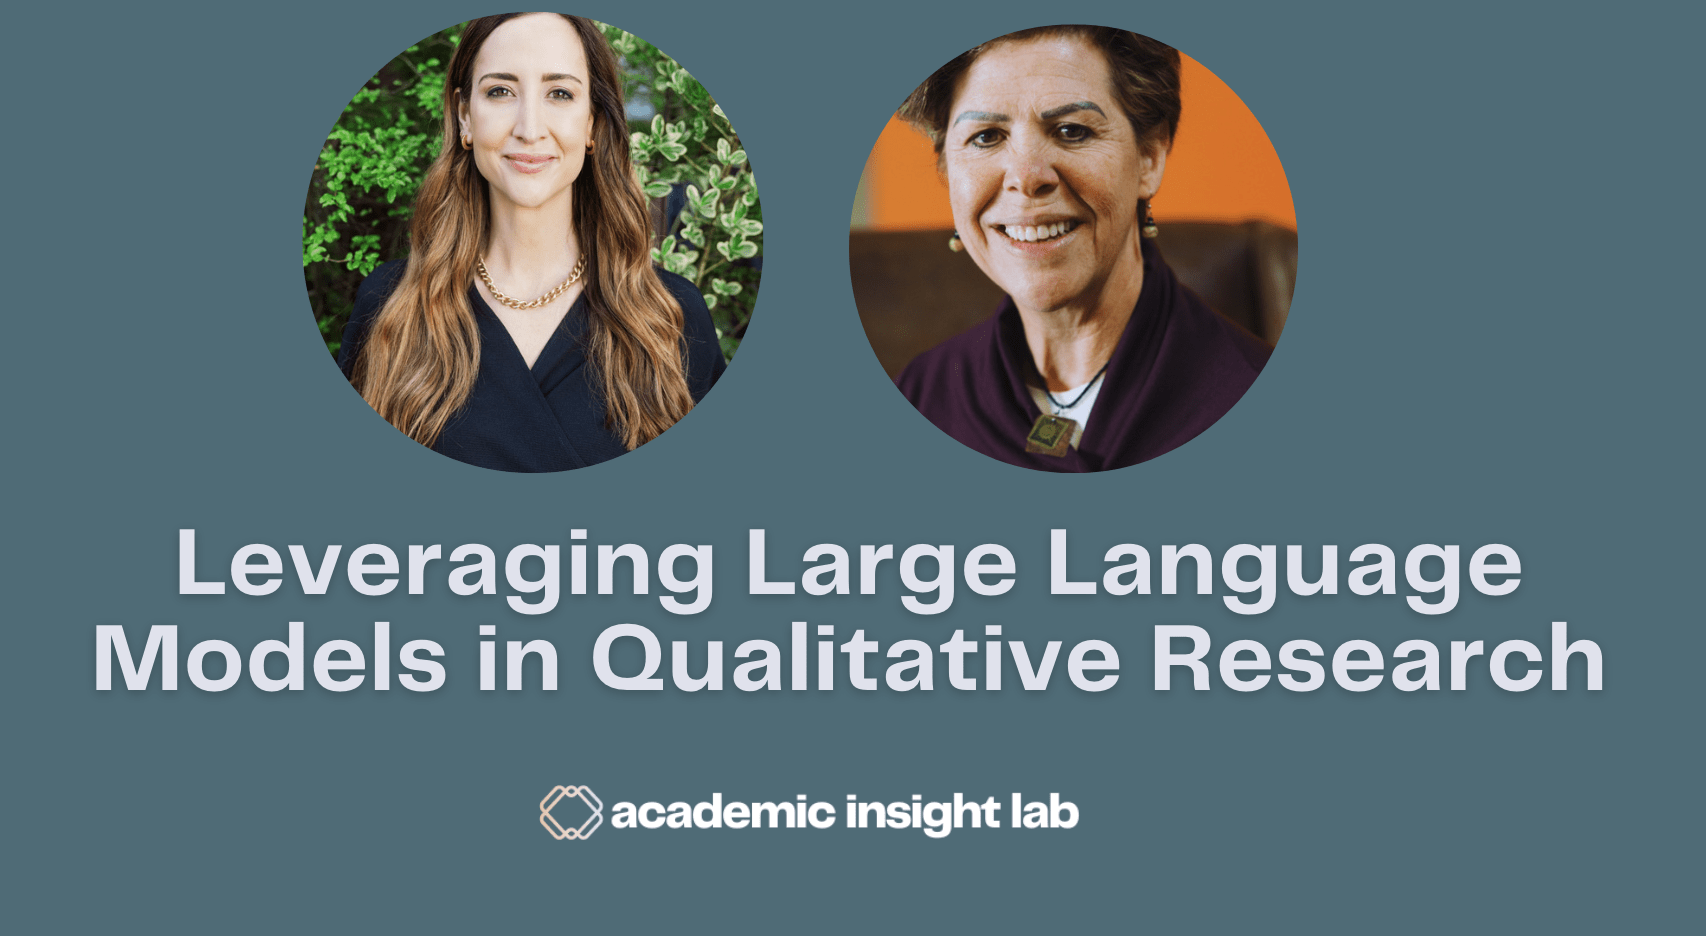 Leveraging Large Language Models in Qualitative Research